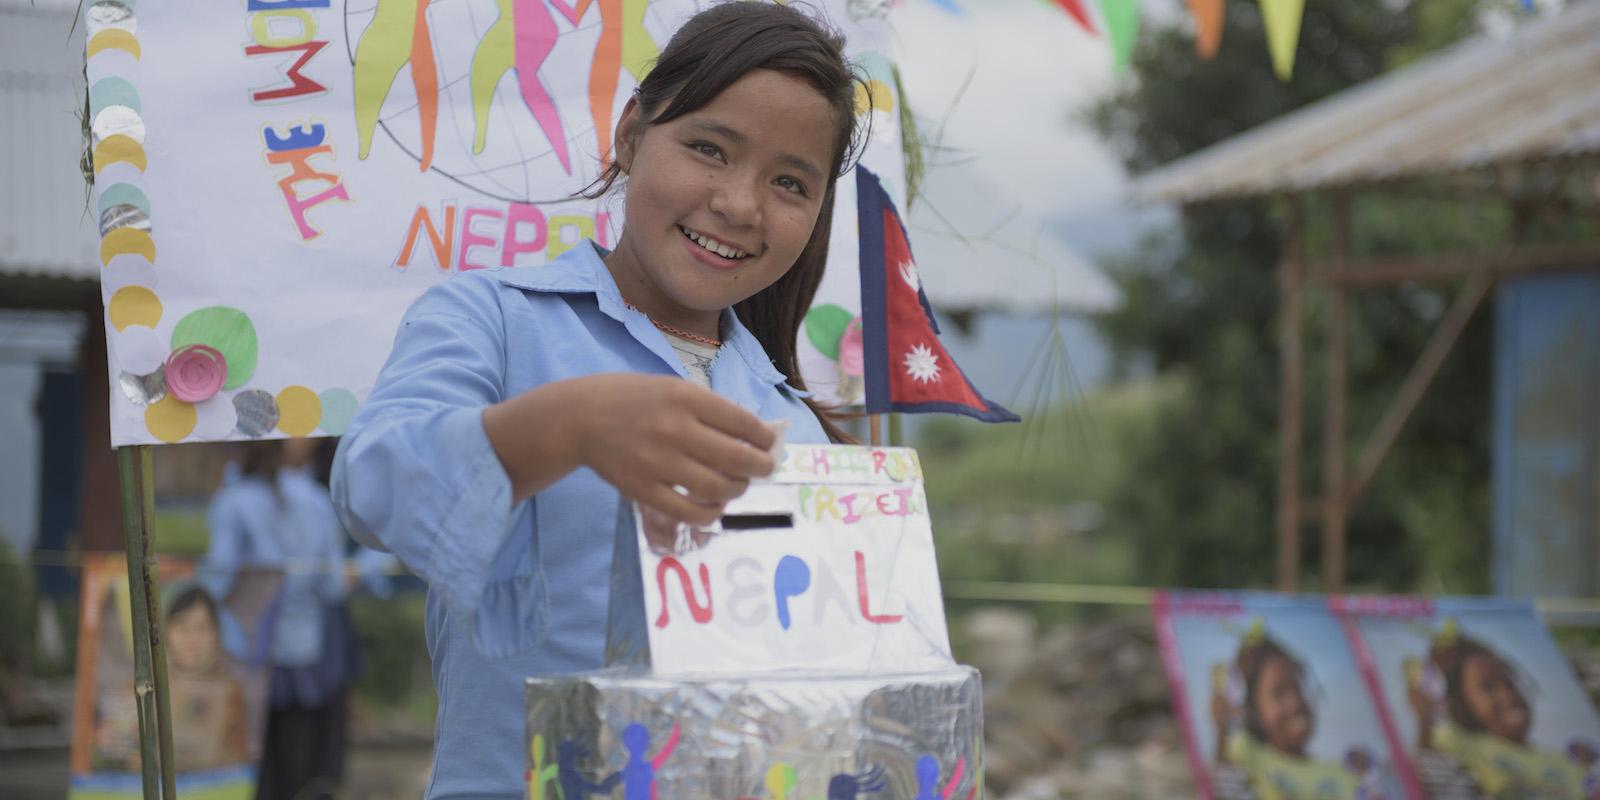 Phulmaya, a girl from Nepal, casts her vote